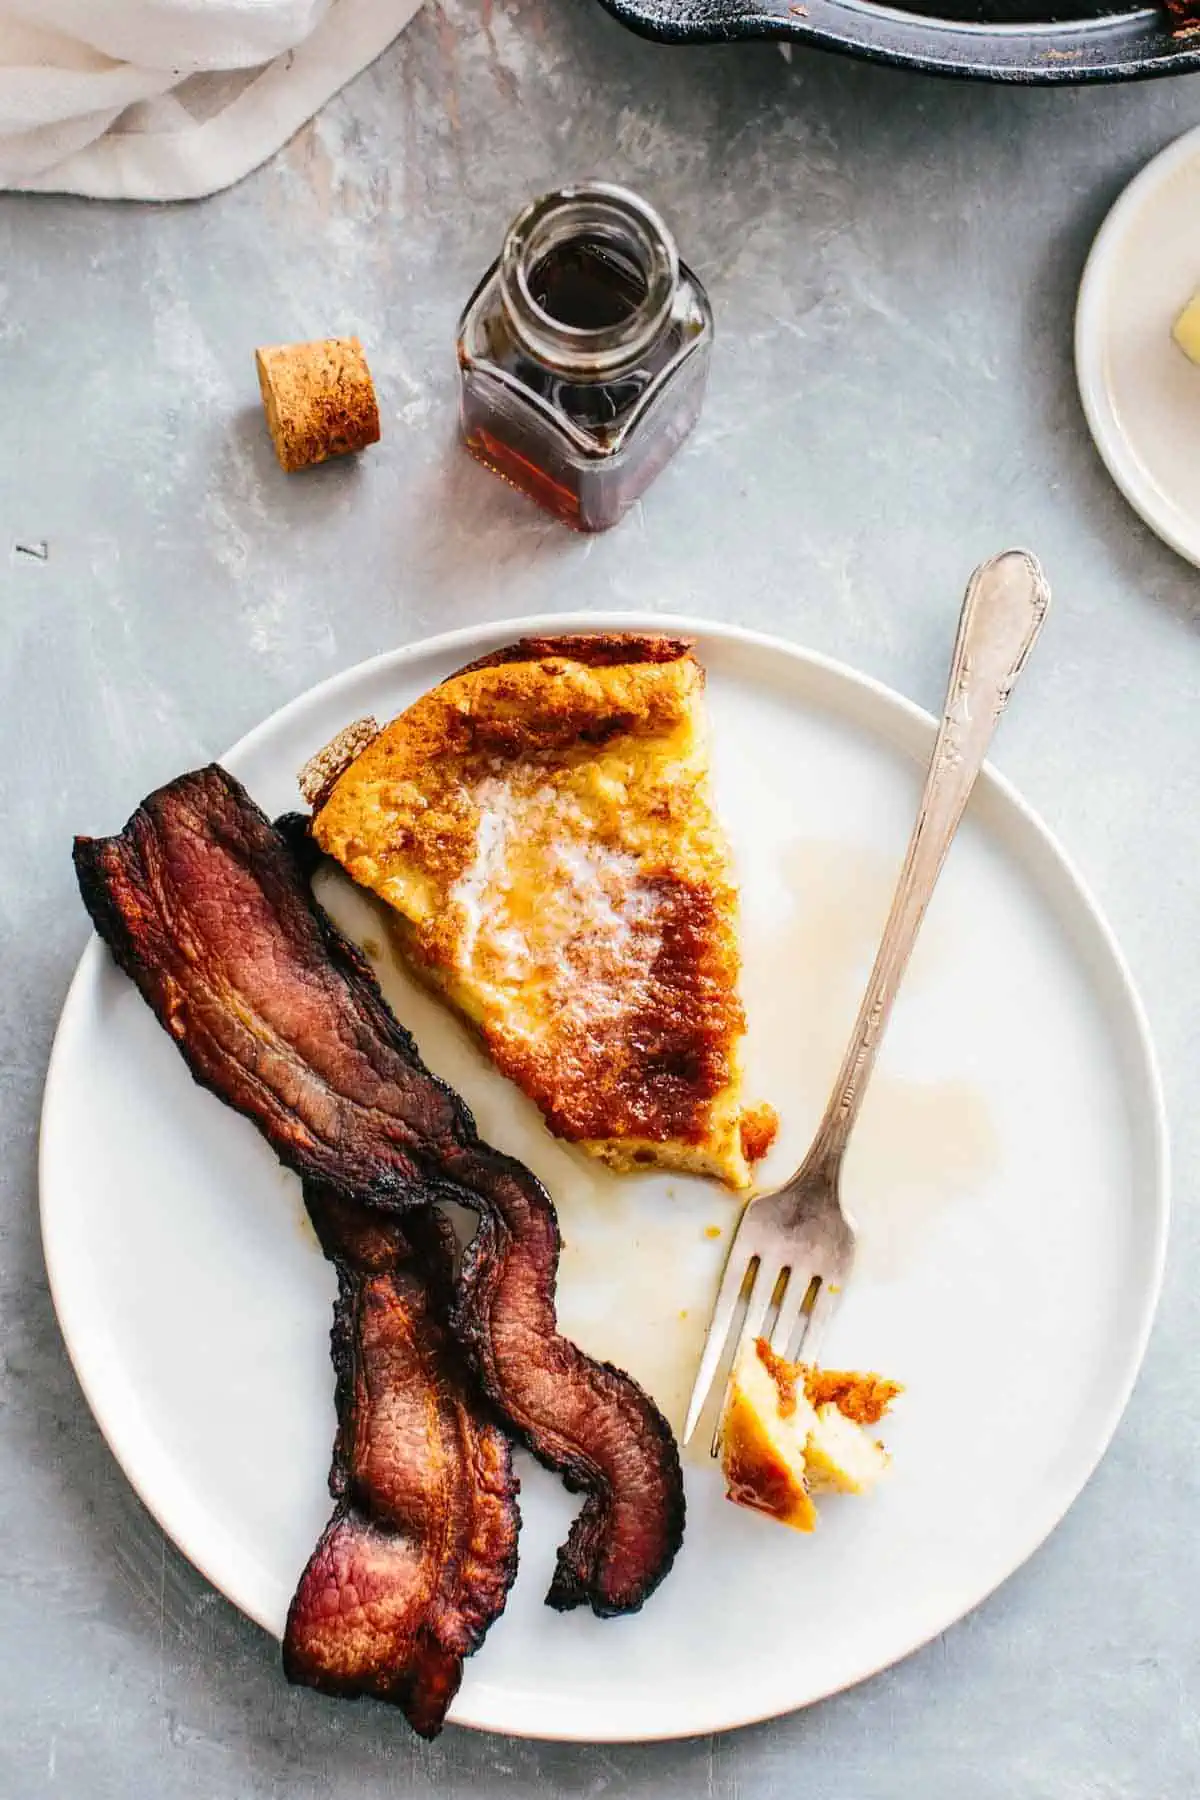 A slice of German pancake with a fork and bacon.